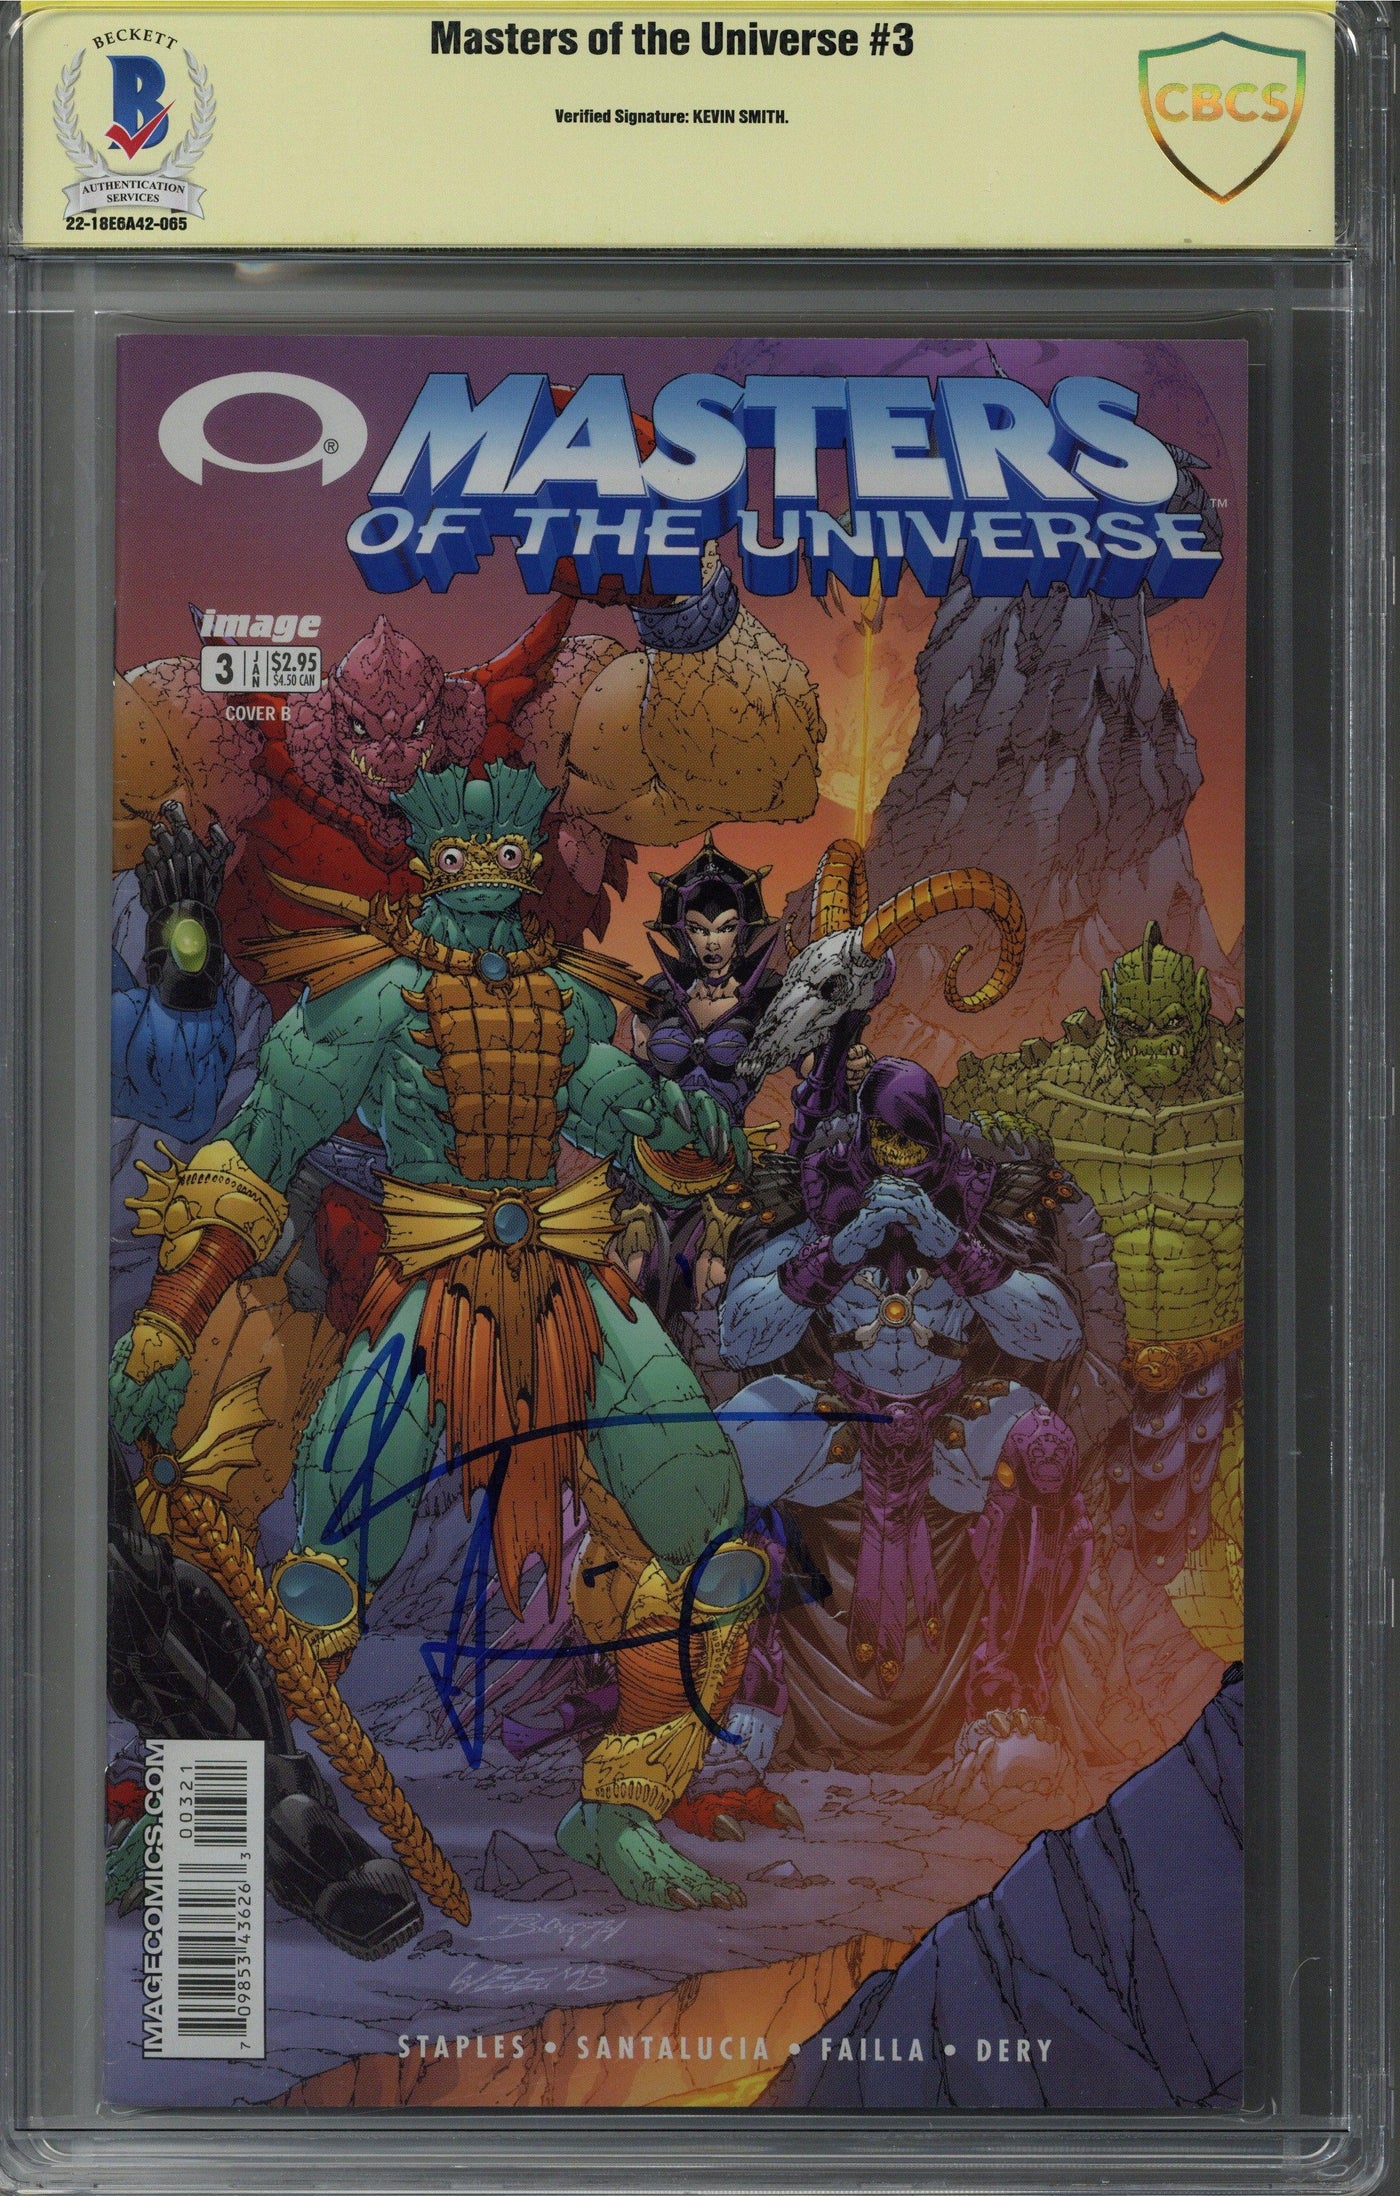 KEVIN SMITH SIGNED MASTERS OF THE UNIVERSE #3 COMIC BOOK CBCS